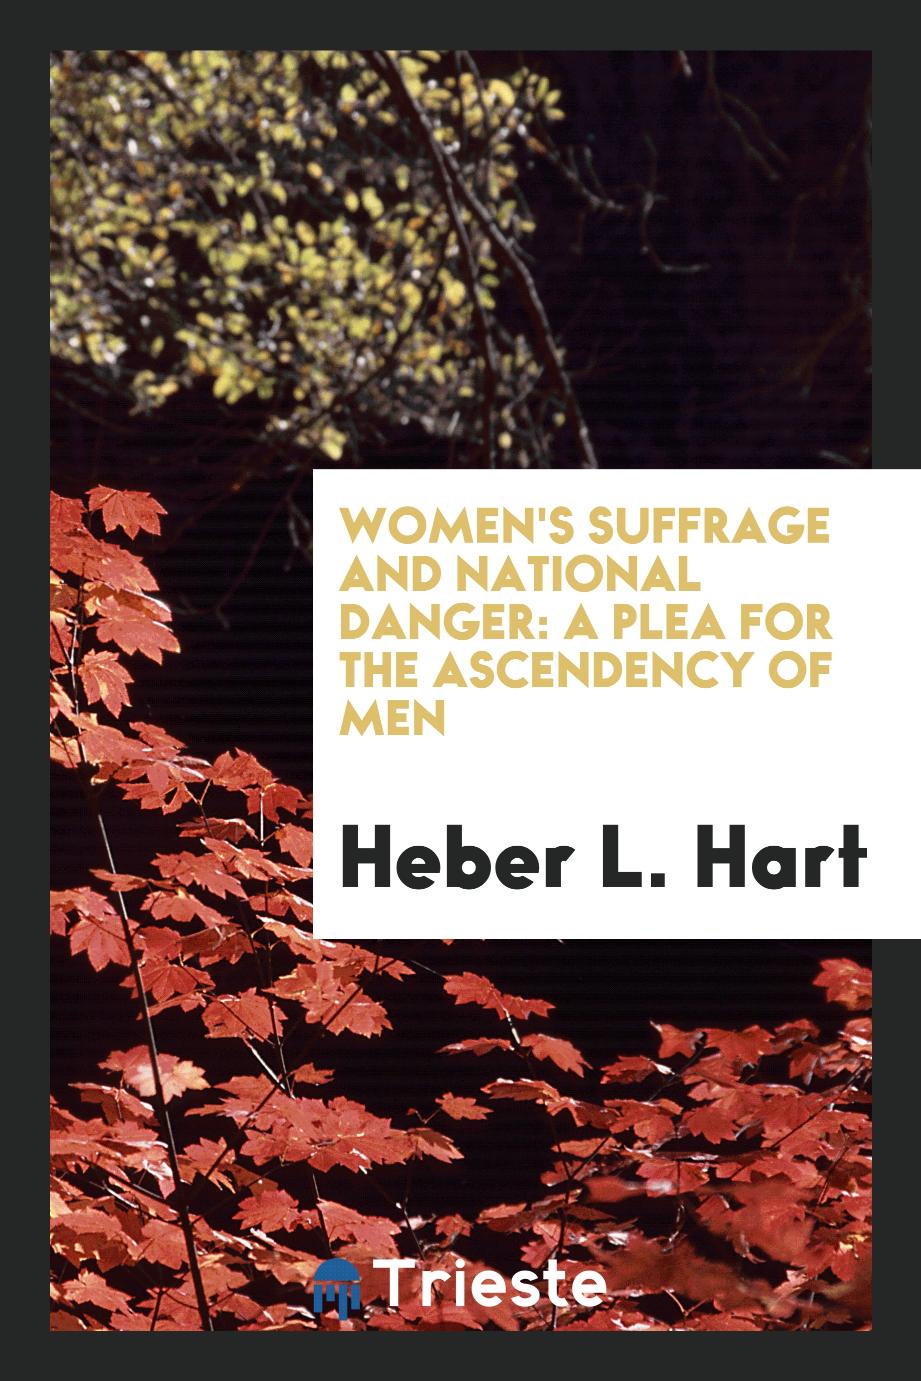 Women's suffrage and national danger: a plea for the ascendency of men